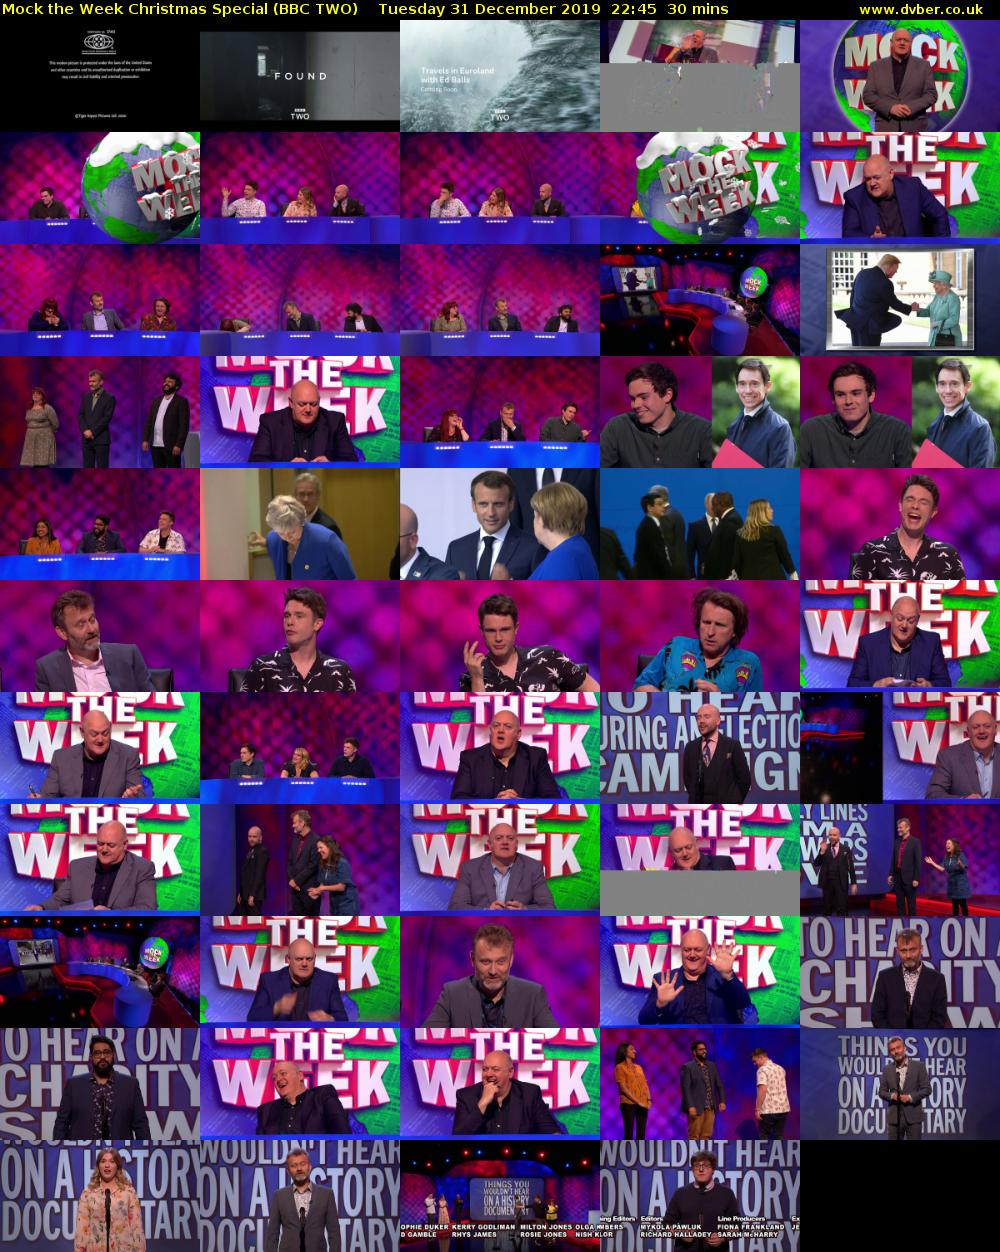 Mock the Week Christmas Special (BBC TWO) Tuesday 31 December 2019 22:45 - 23:15